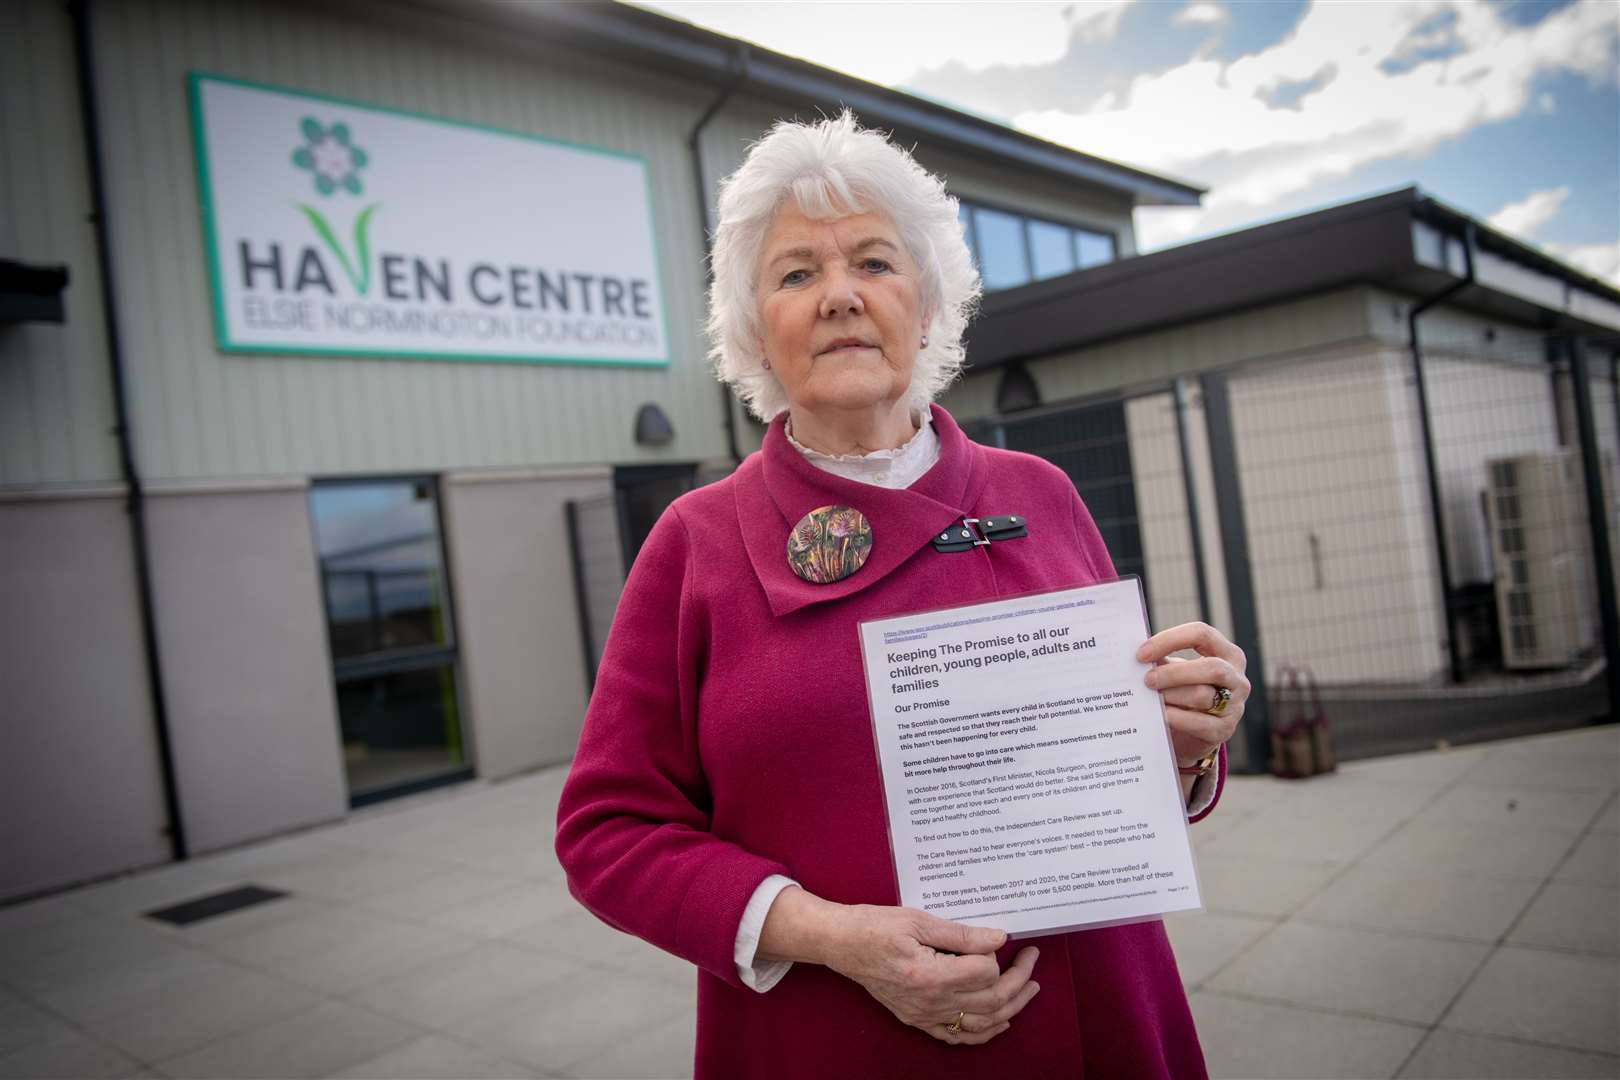 Elsie Normington hopes the Scottish Government will change its mind and grant £136,544 for the Haven Centre. Picture: Callum Mackay.